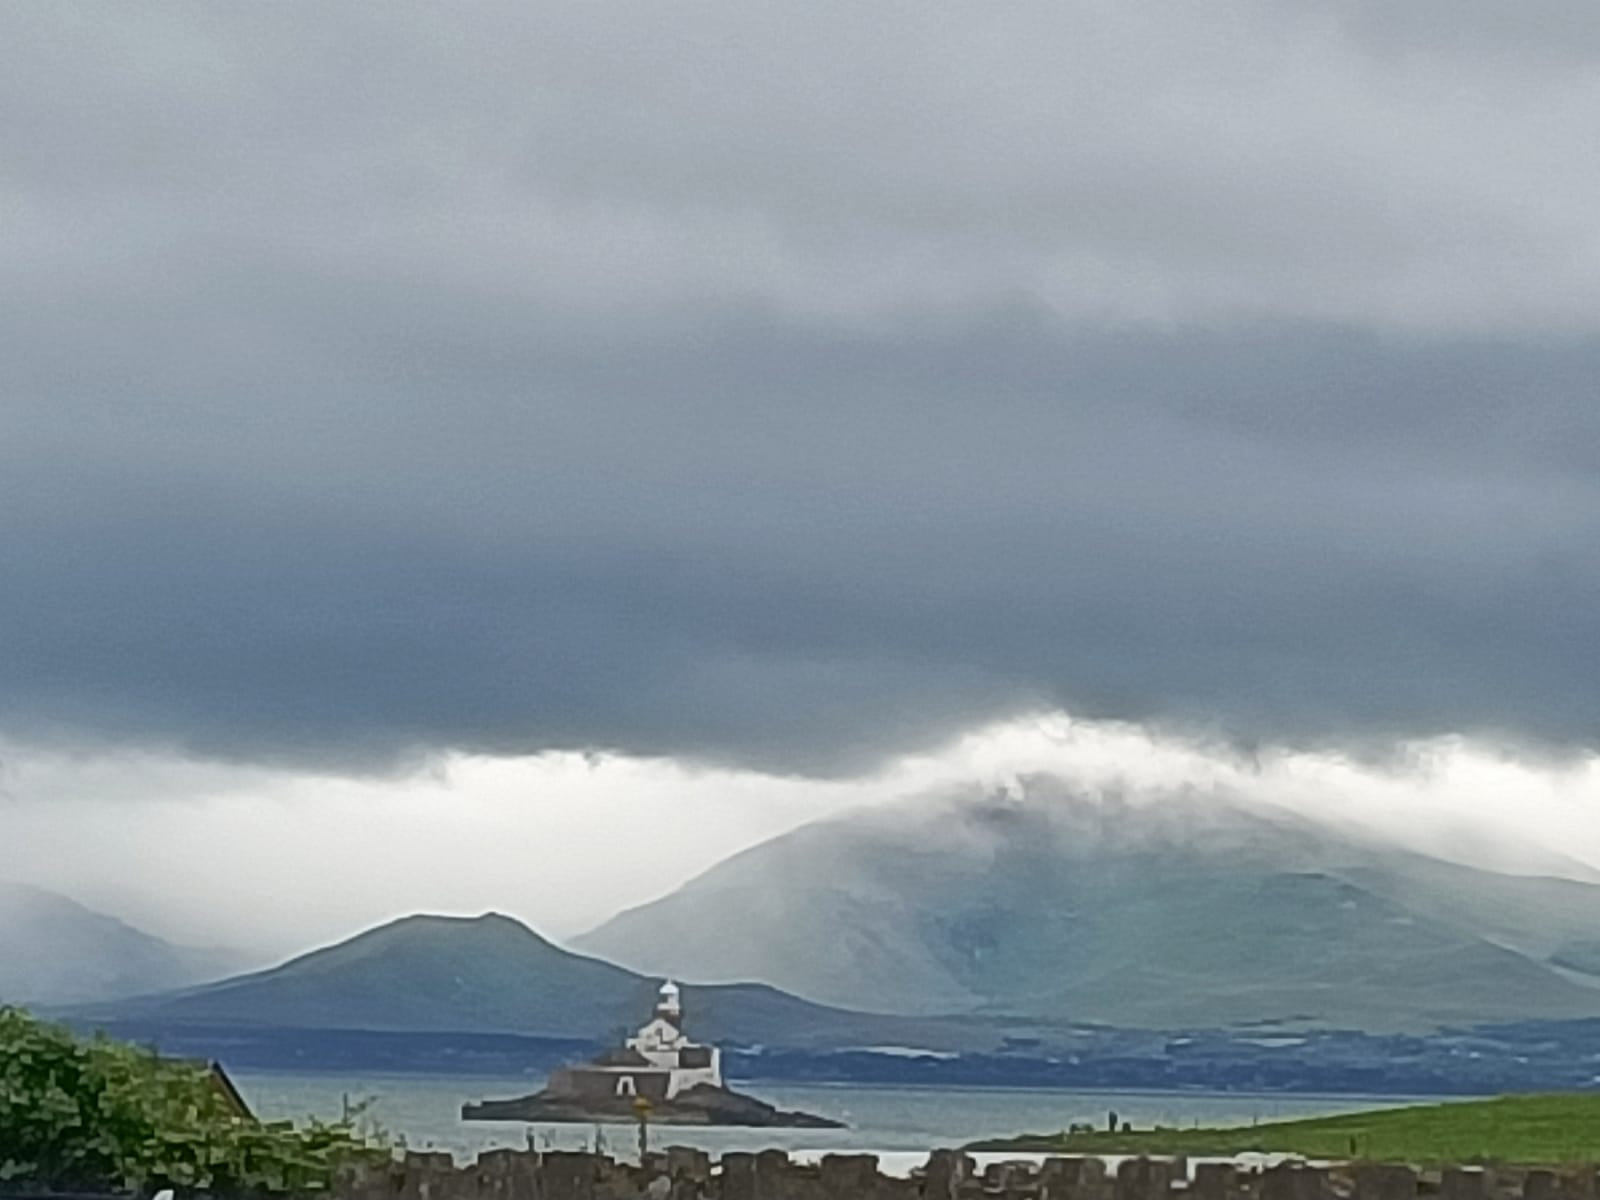 Fenit Greenway Run event at Kerry Mental Health & Wellbeing Fest 2022